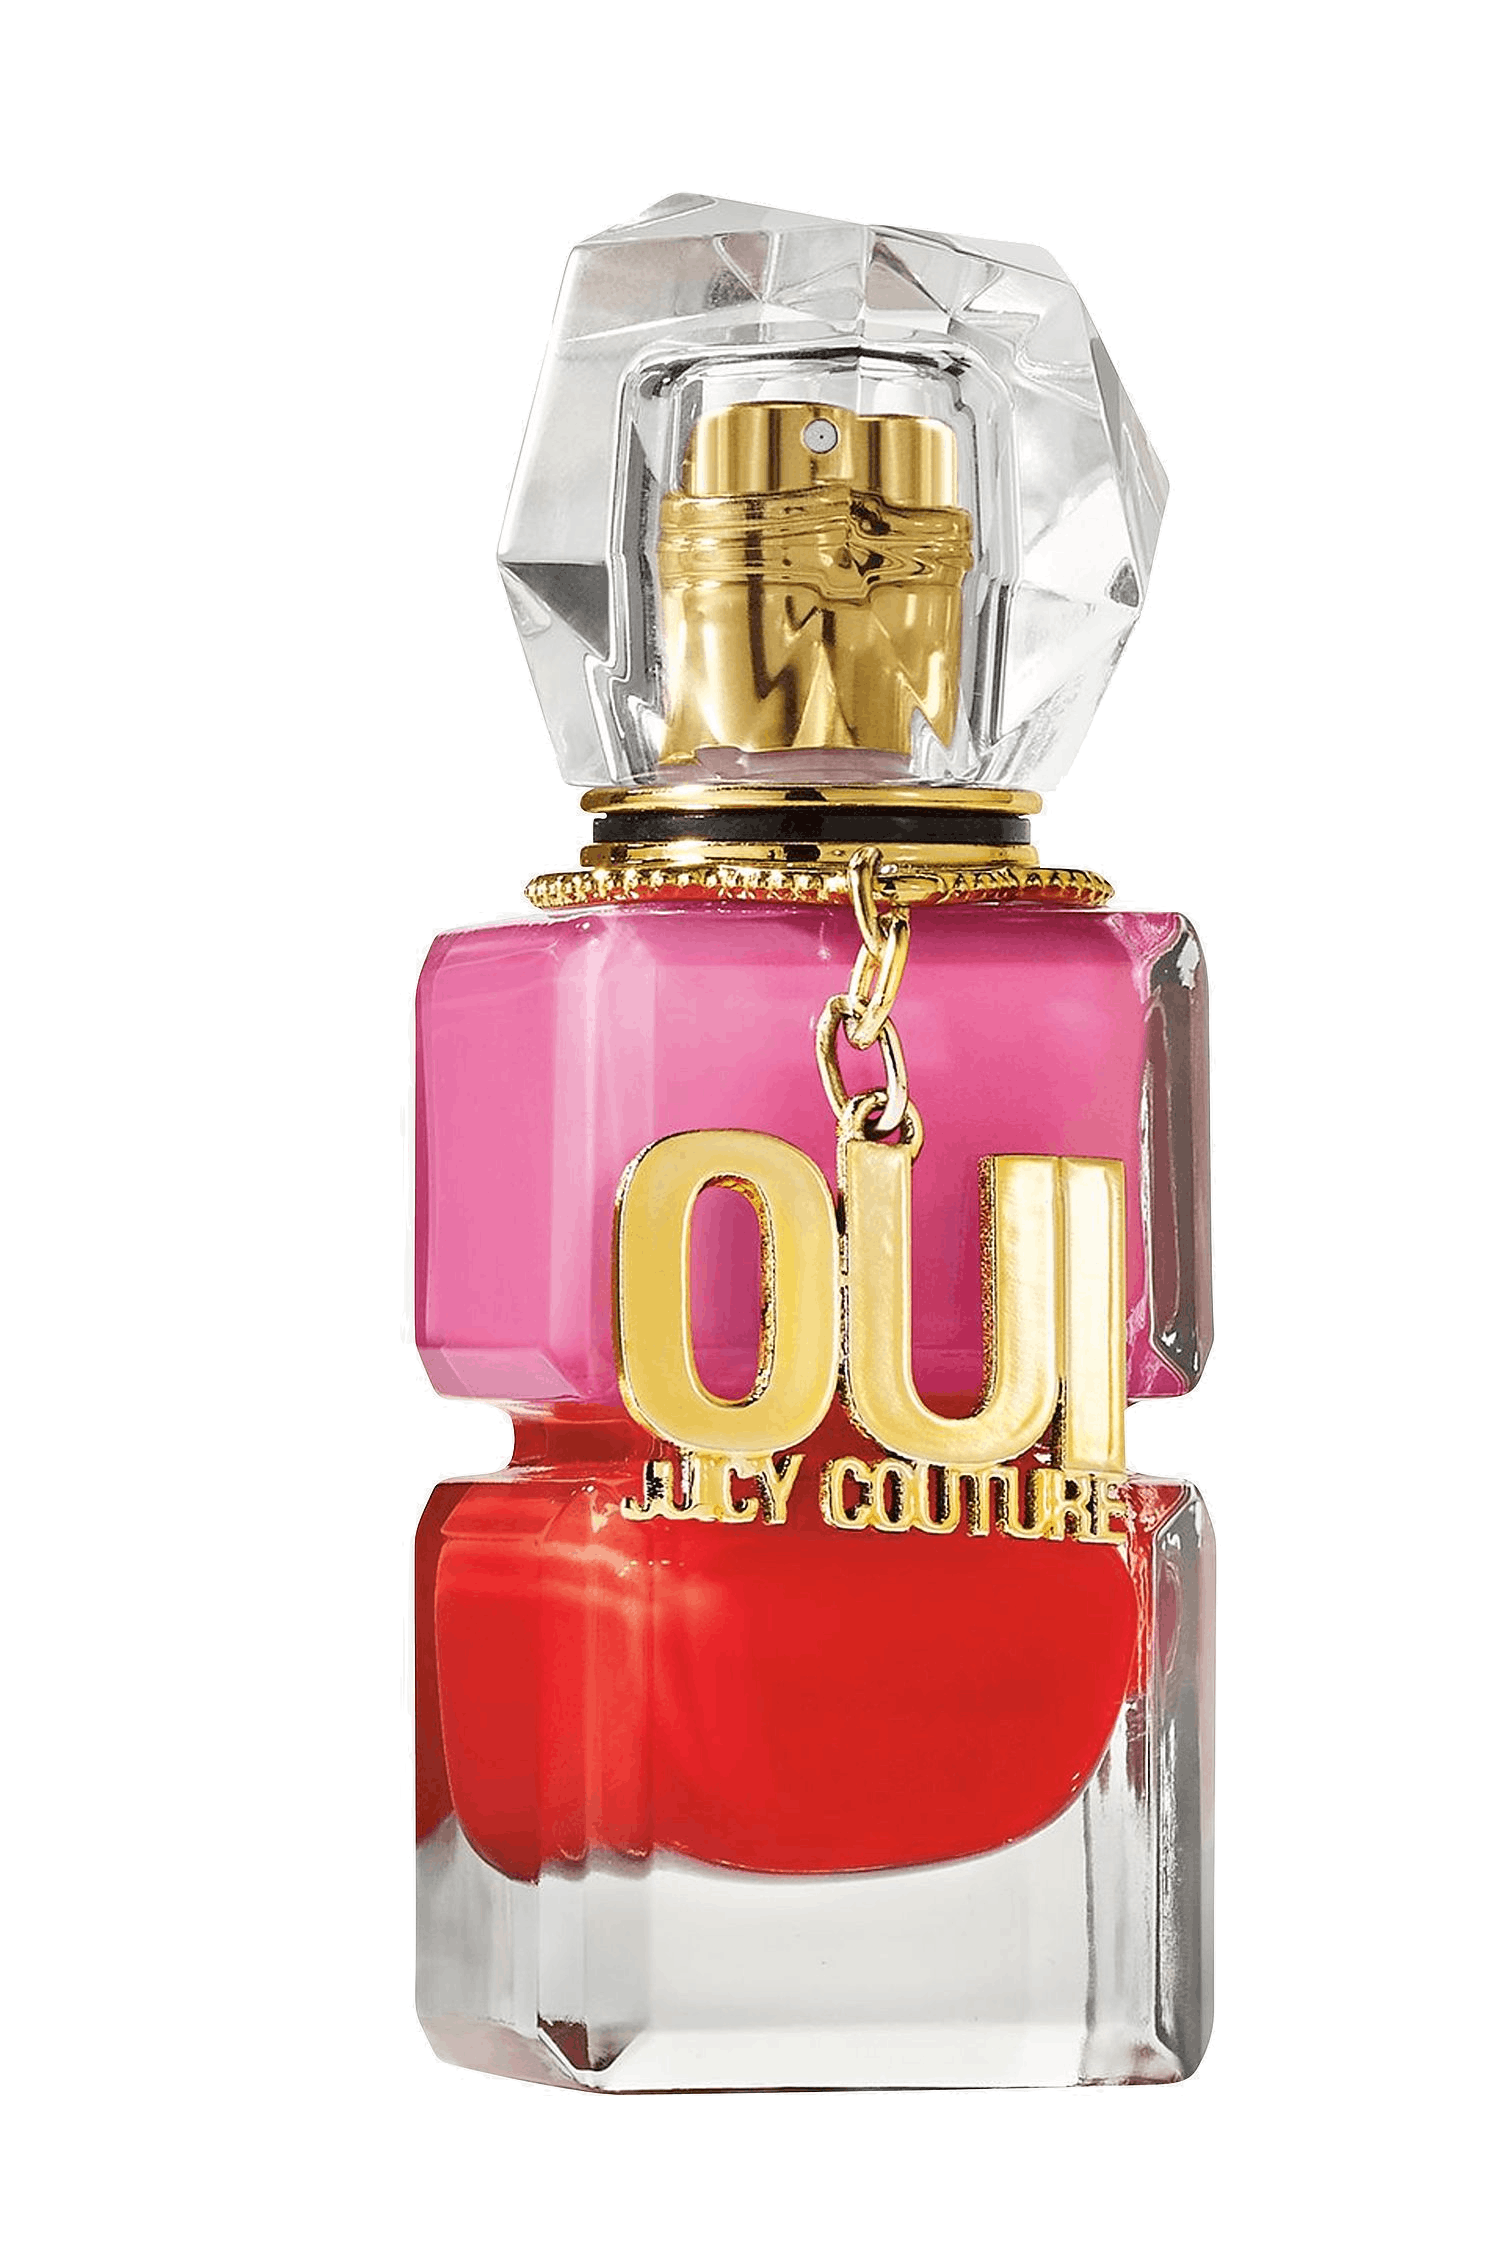 juicy couture oui edp 100 ml